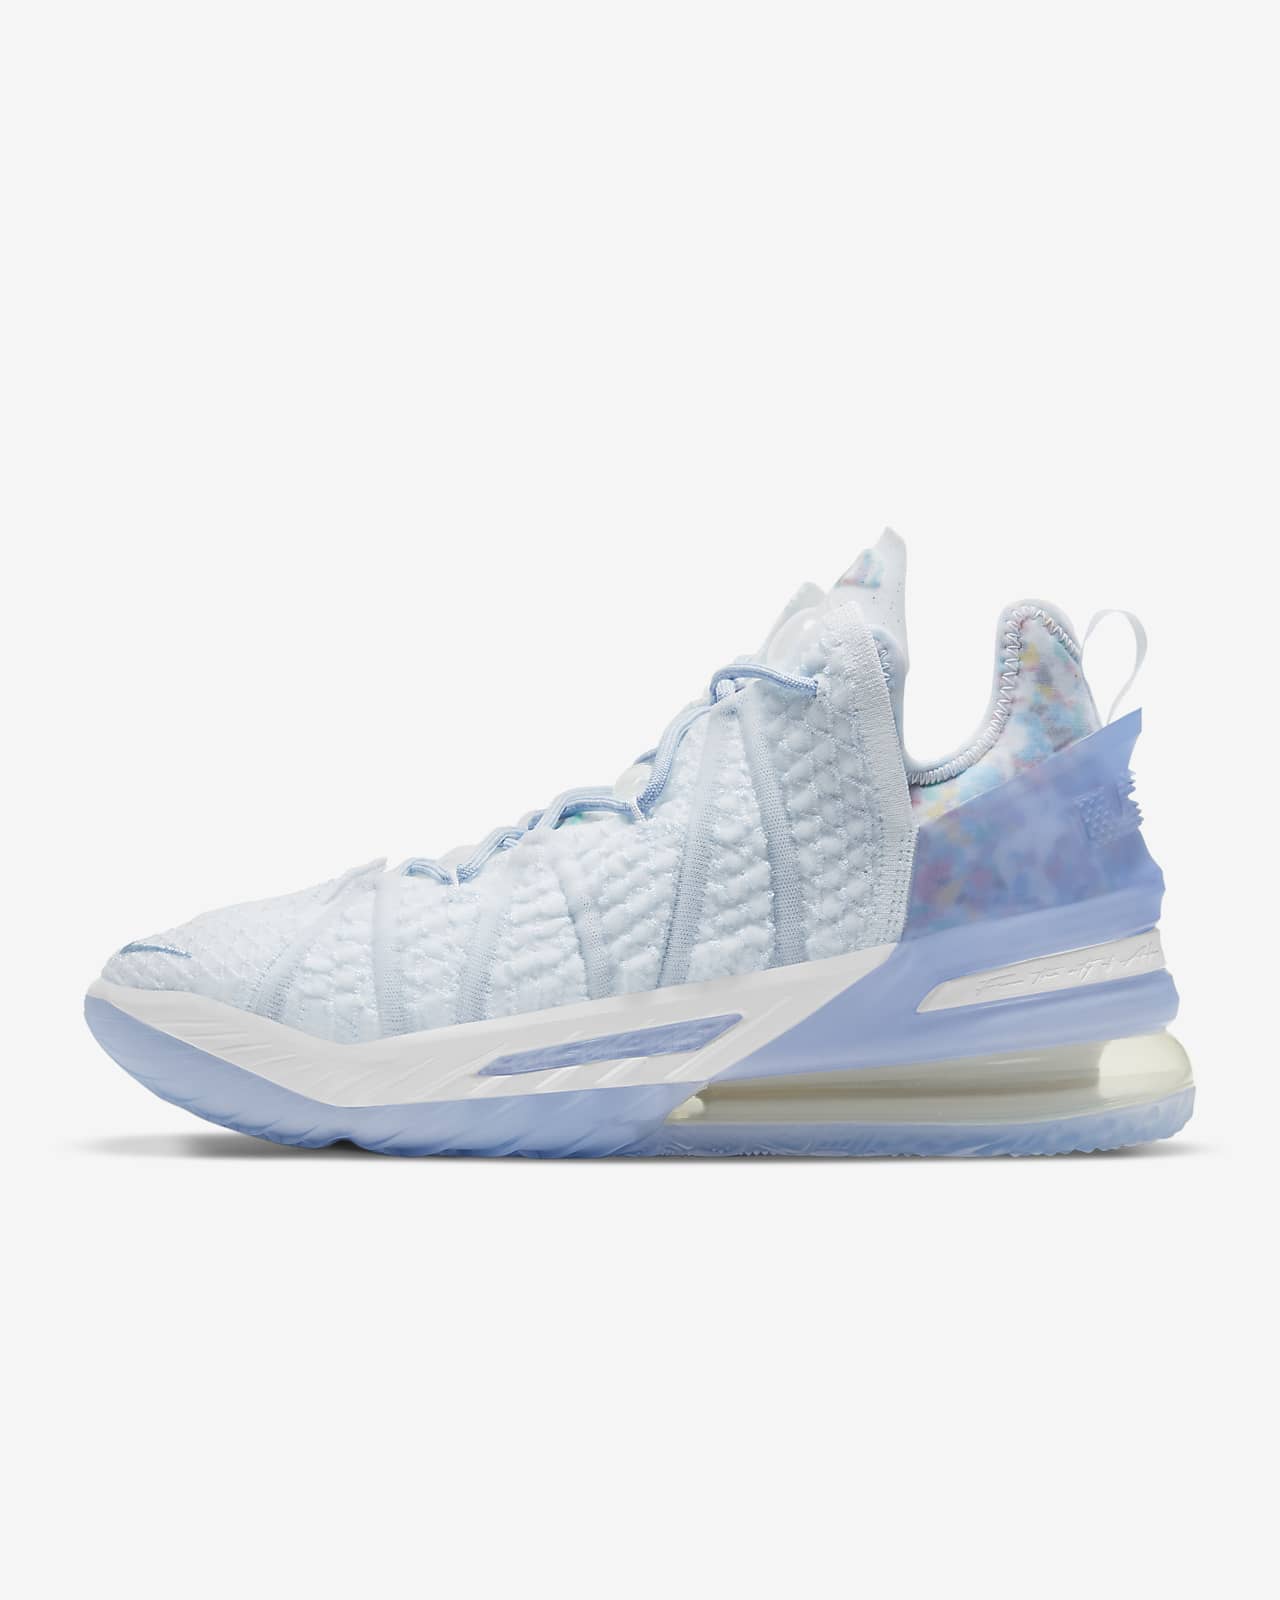 LeBron 18 "Play for the Future" Basketball Shoes